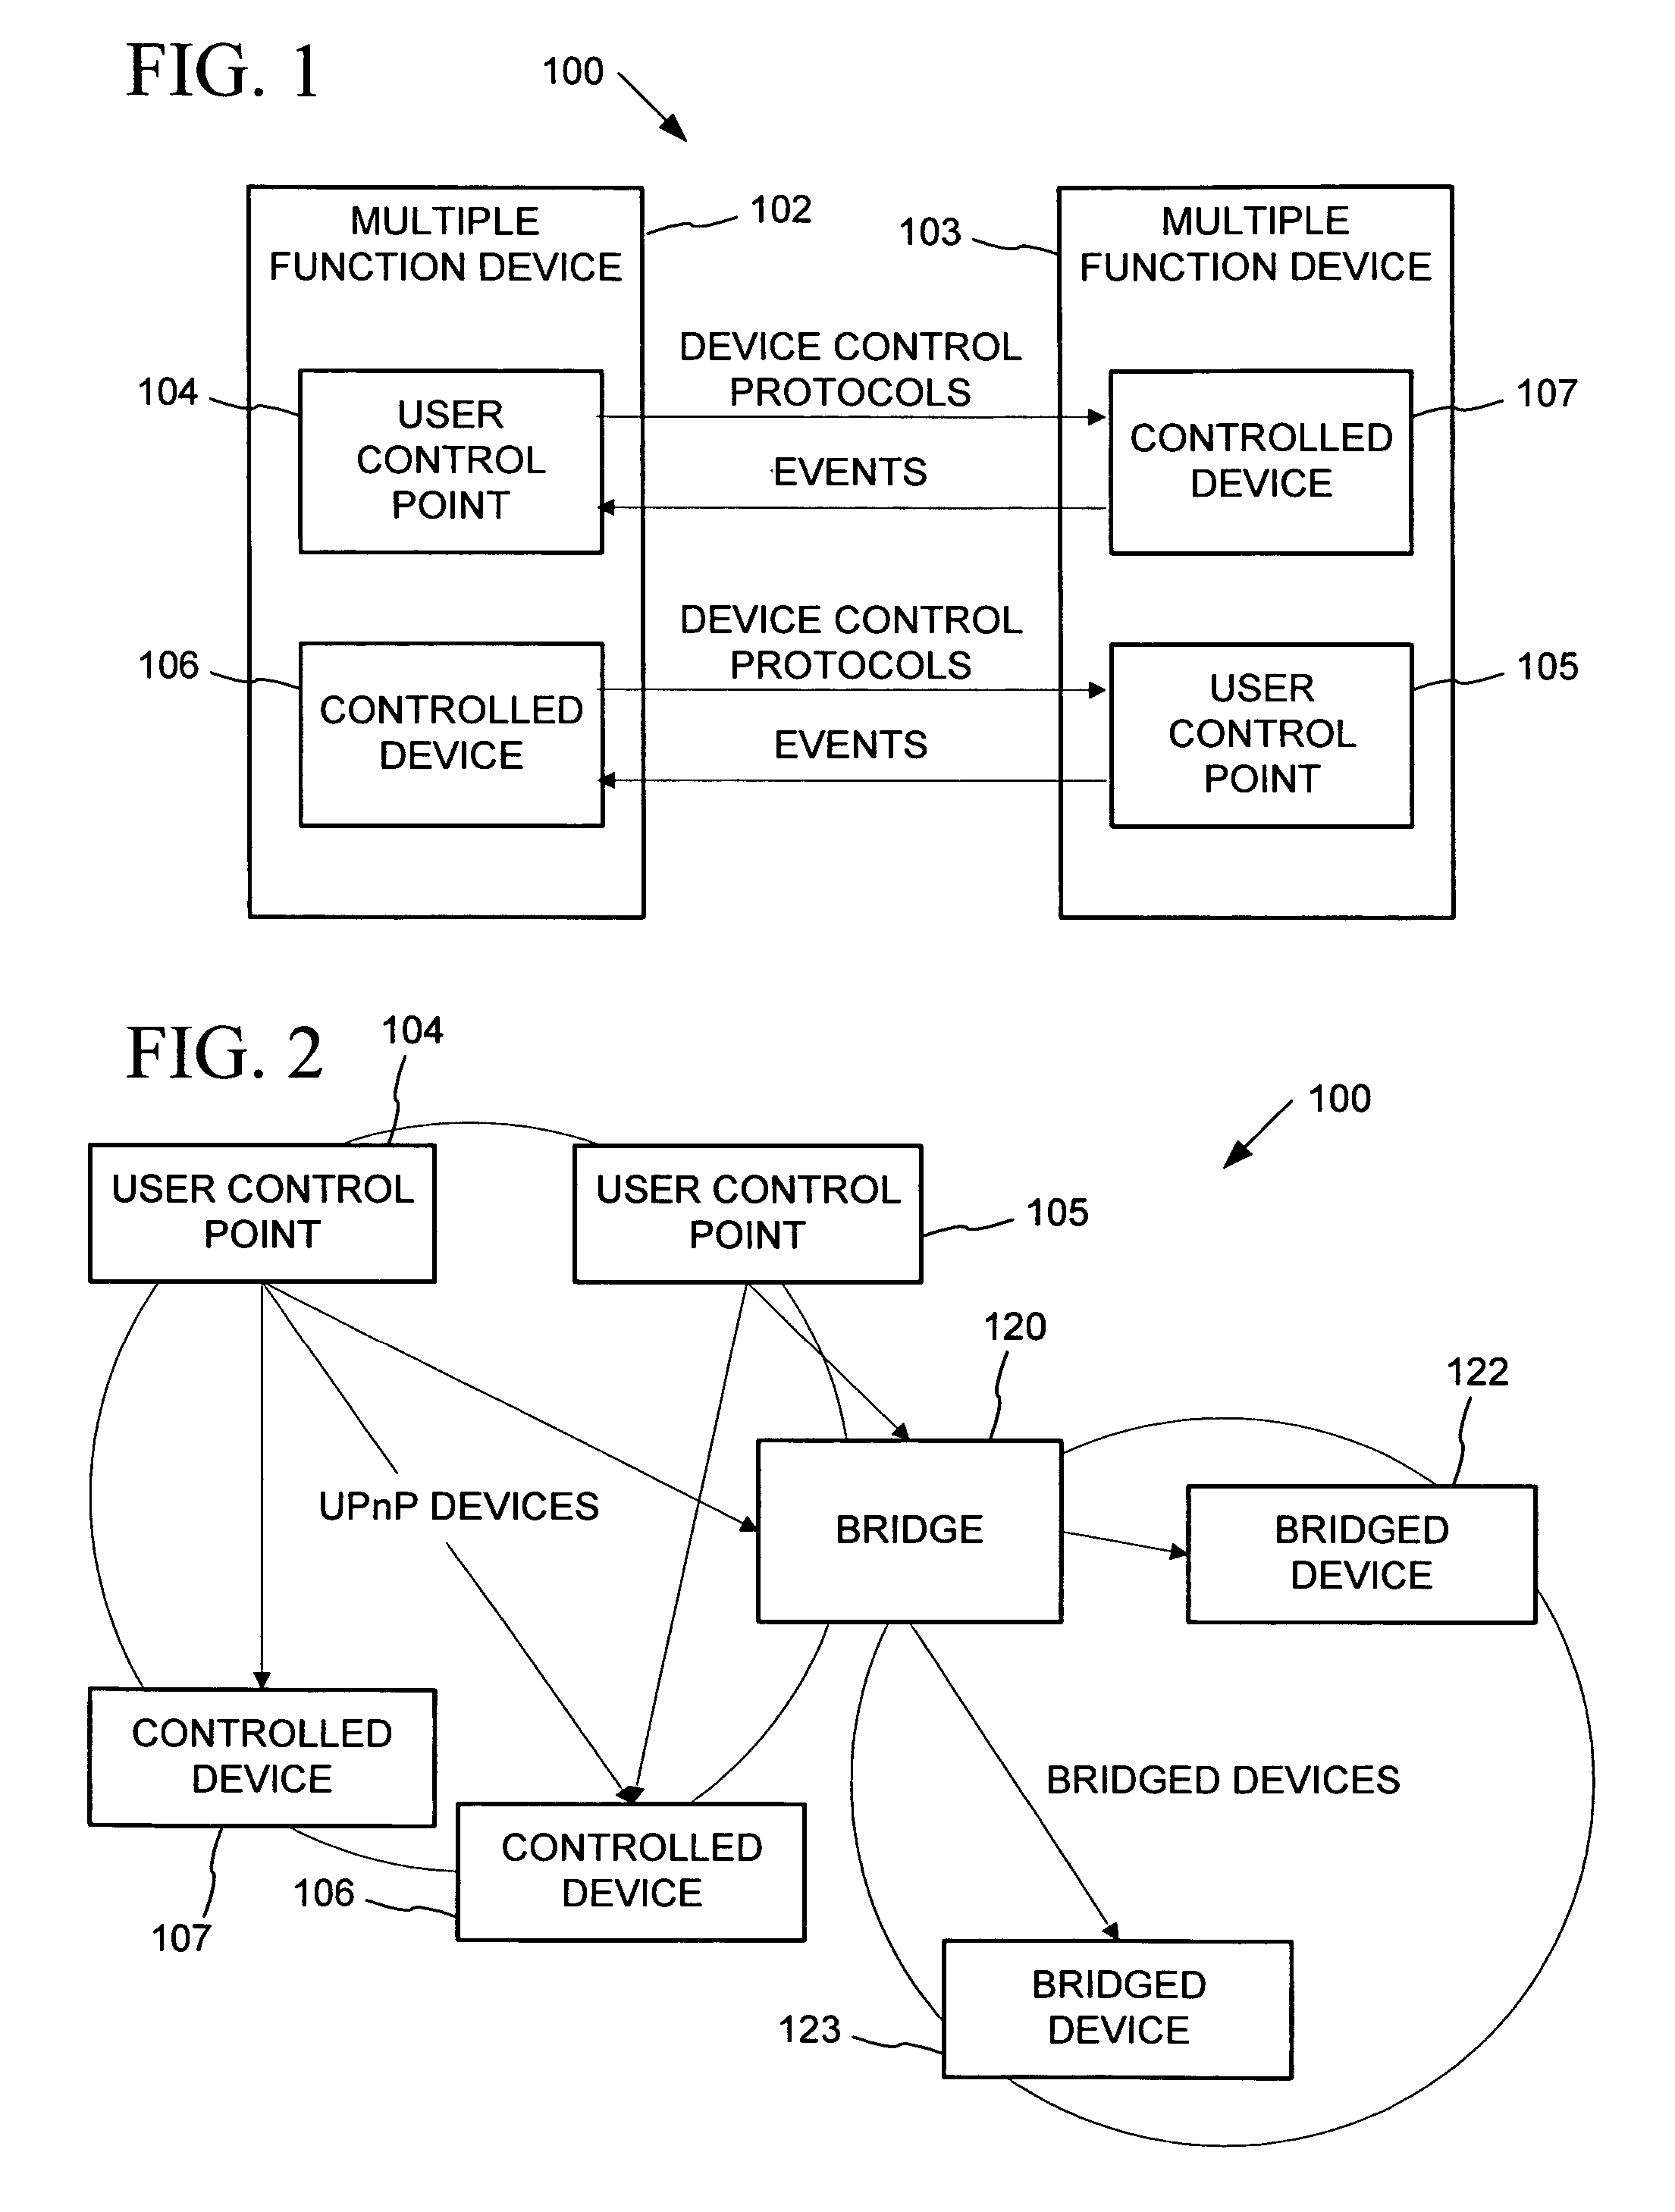 Data driven remote device control model with general programming interface-to-network messaging adaptor